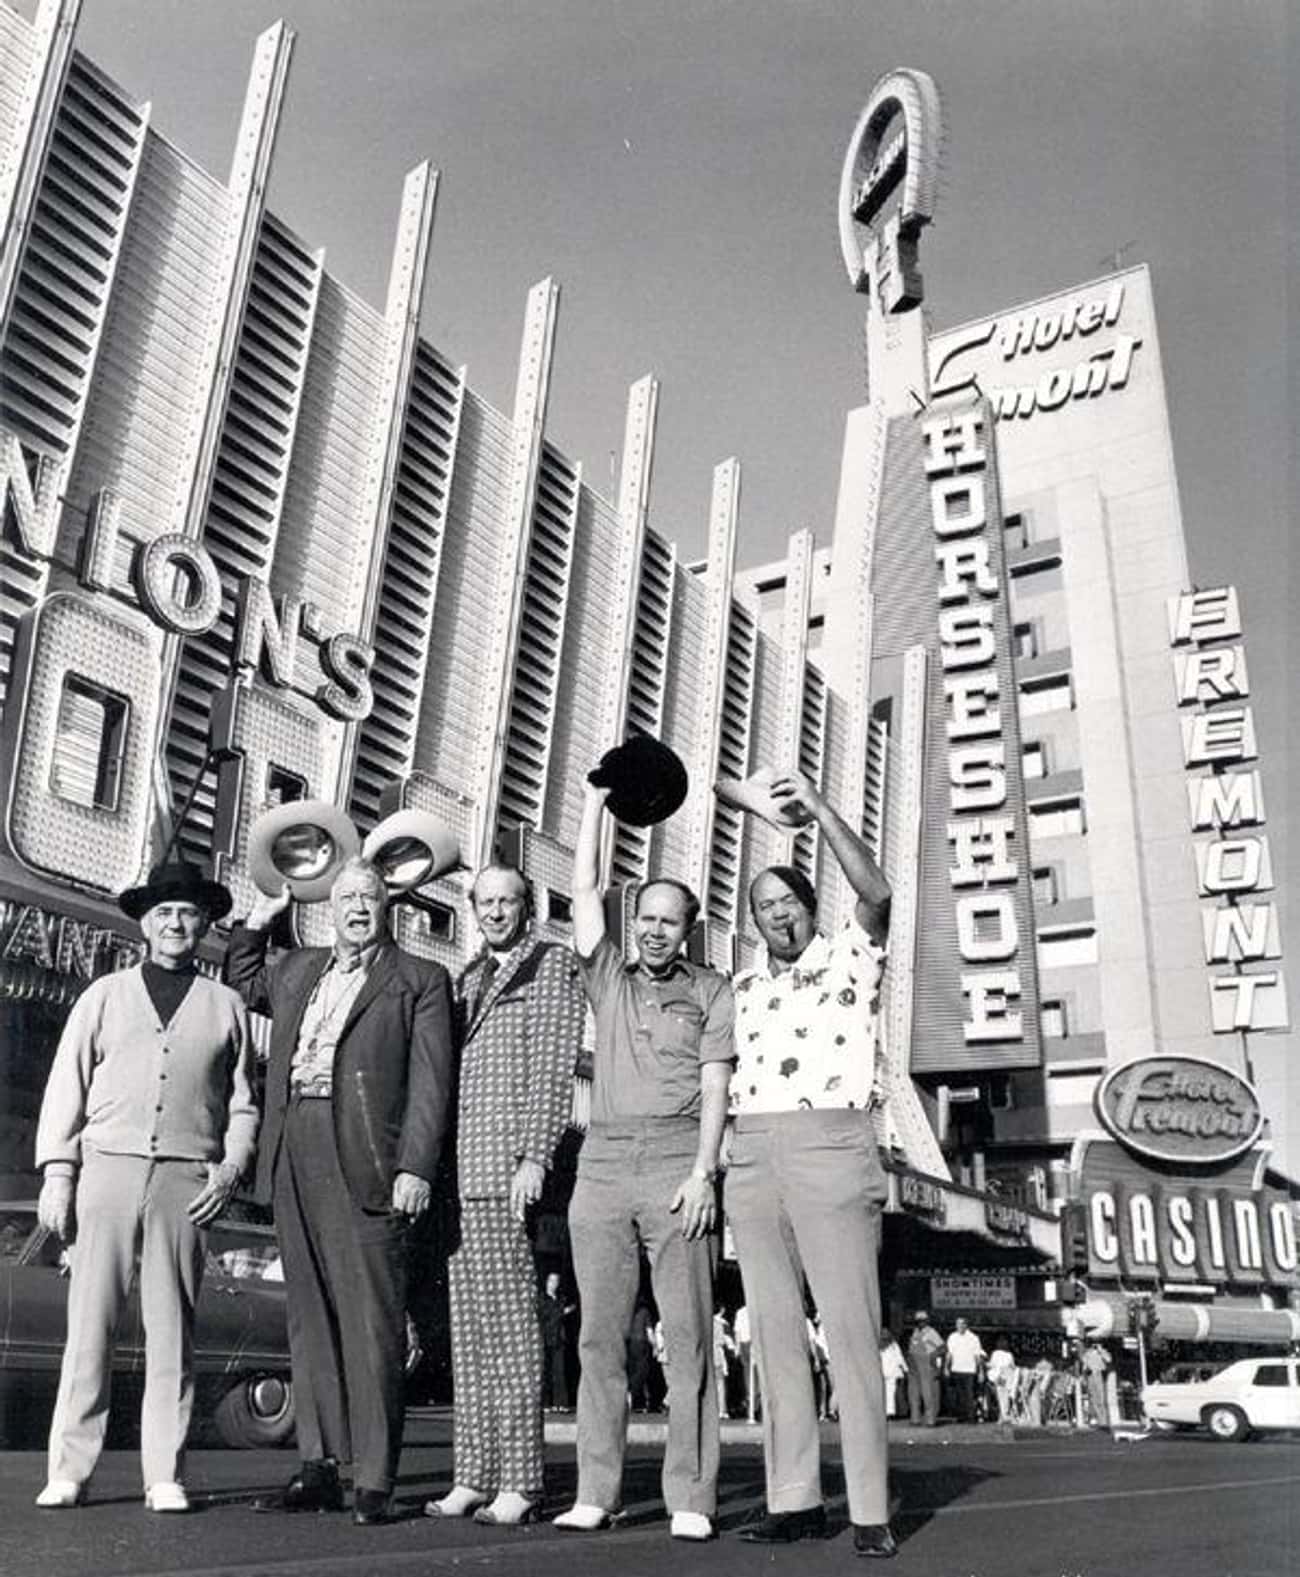 After Leaving Texas, Binion Set Up The Horseshoe Casino In Las Vegas